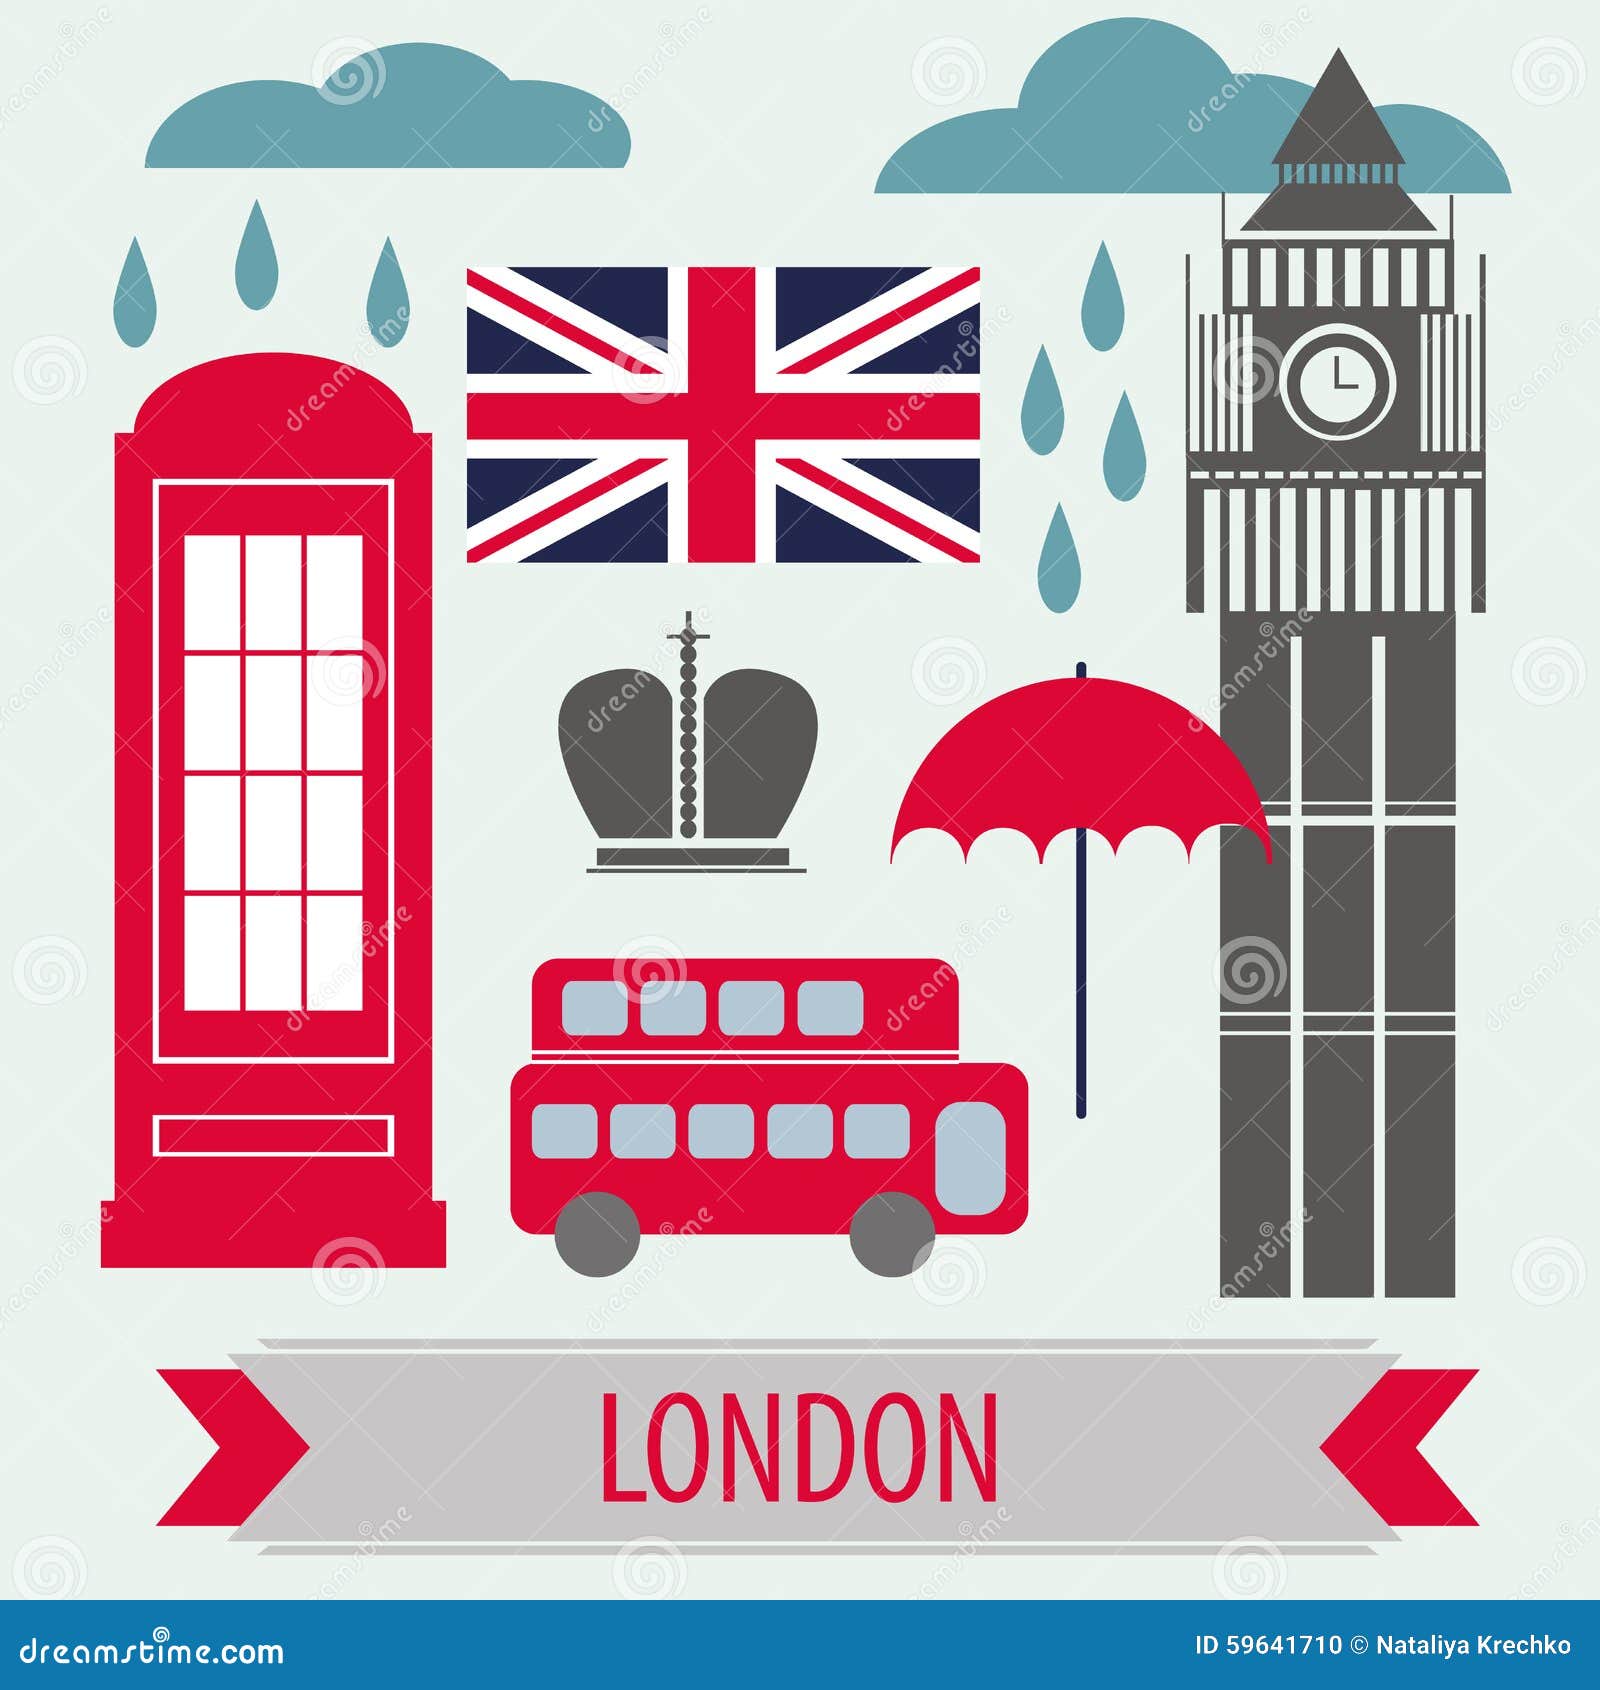 Poster London Symbols and Landmarks Stock Vector - Illustration of monument, architecture: